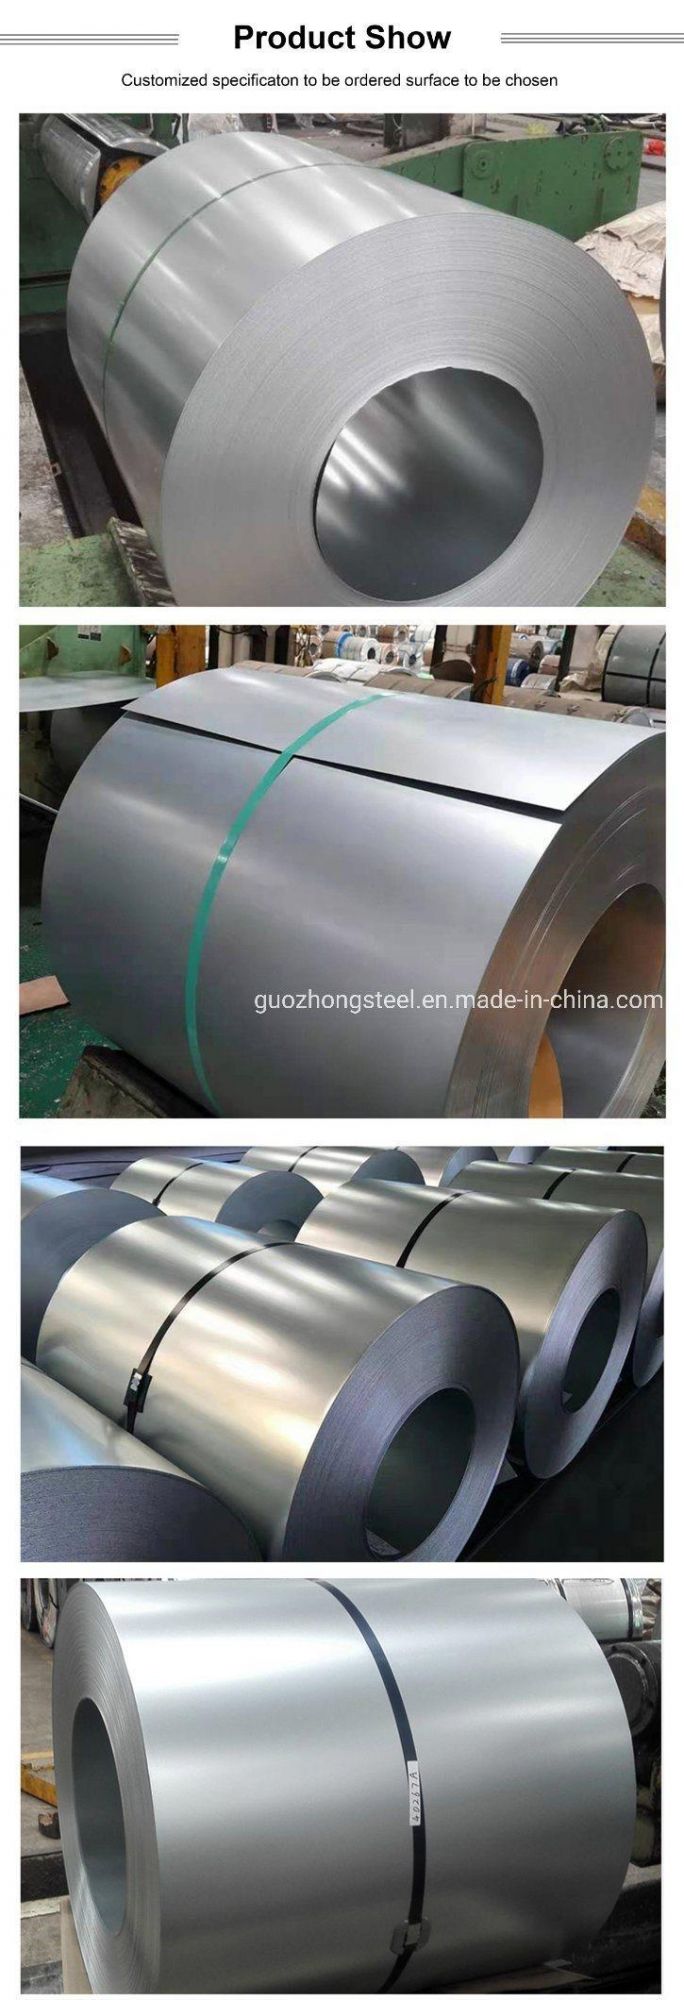 Guozhong Hot Rolling Galvanized Prepainted Steel Coil Stock